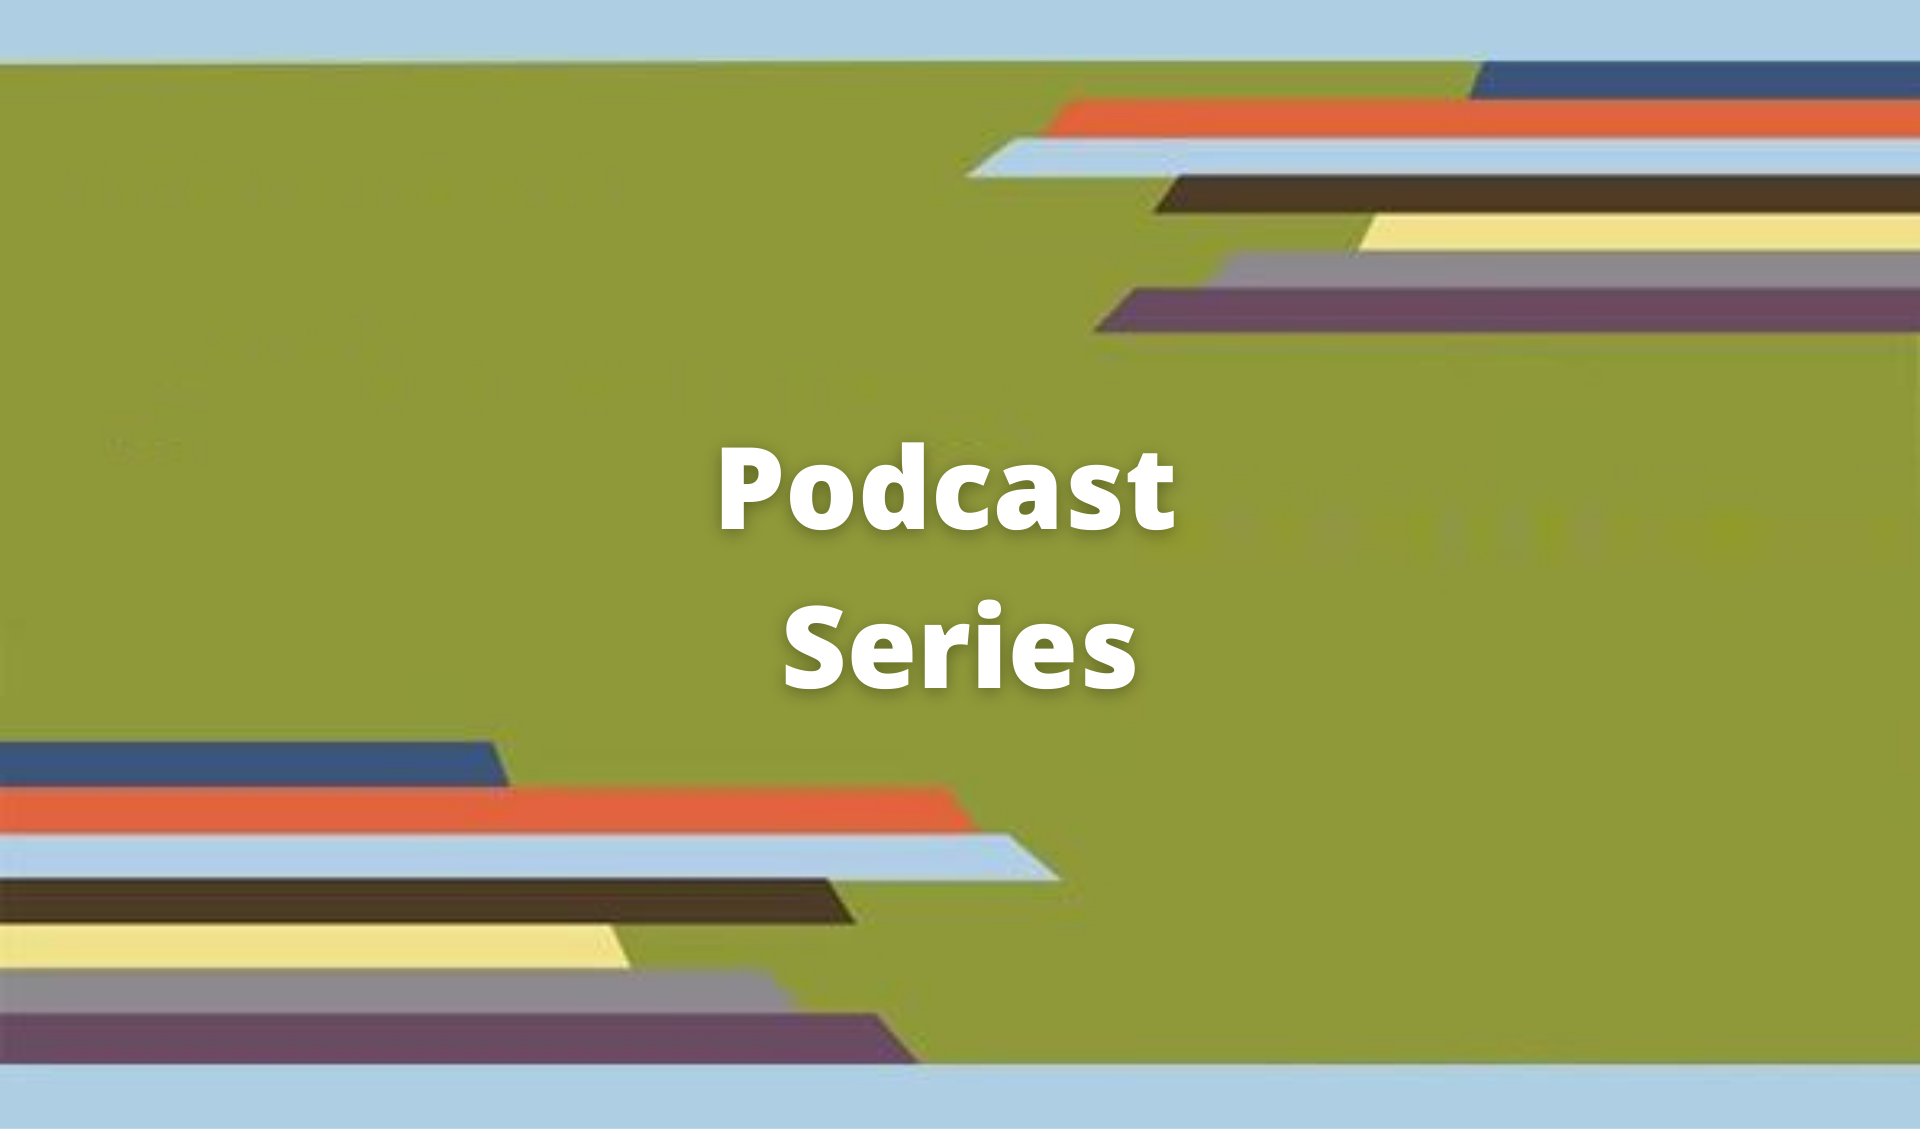 Podcast Series Graphic